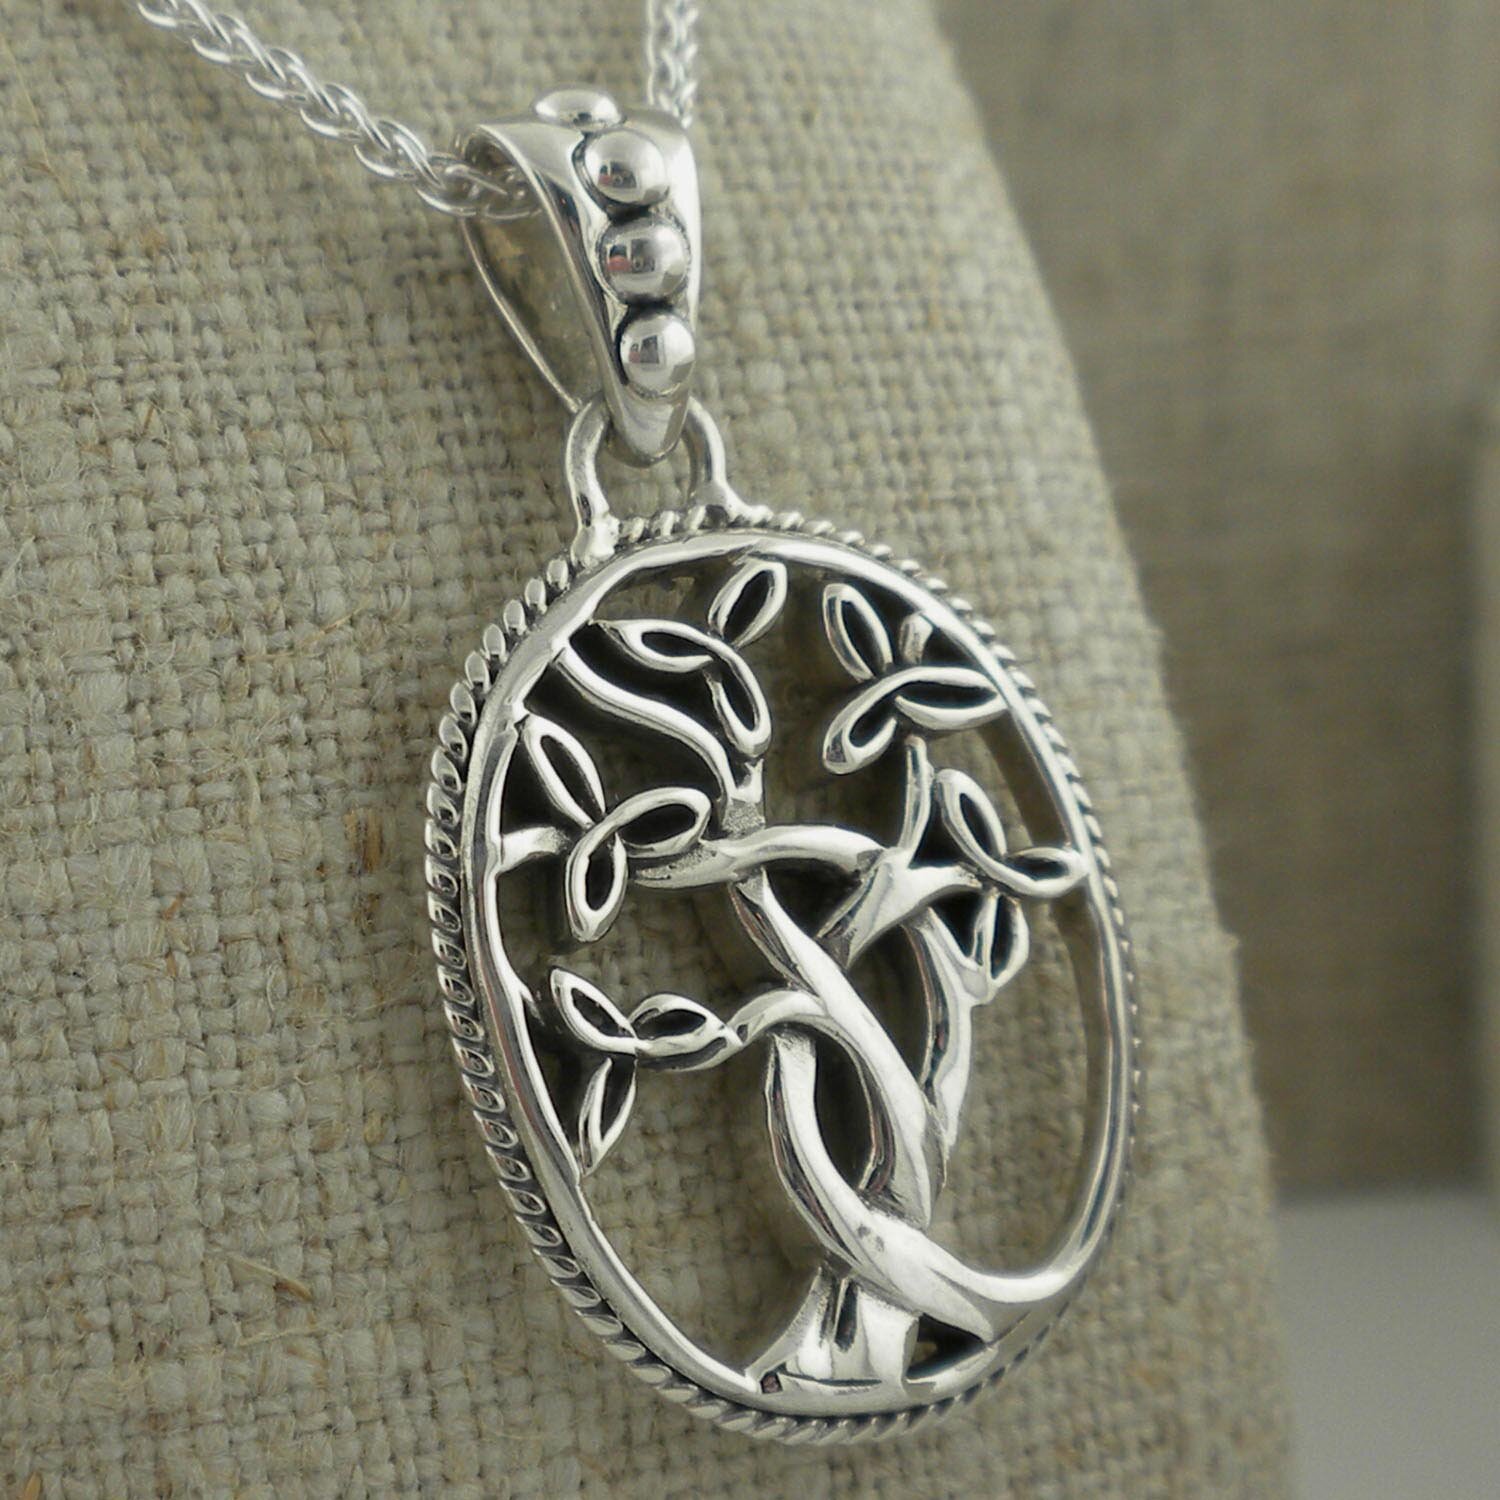 Trinity Knot Tree of Life Pendant in Sterling Silver